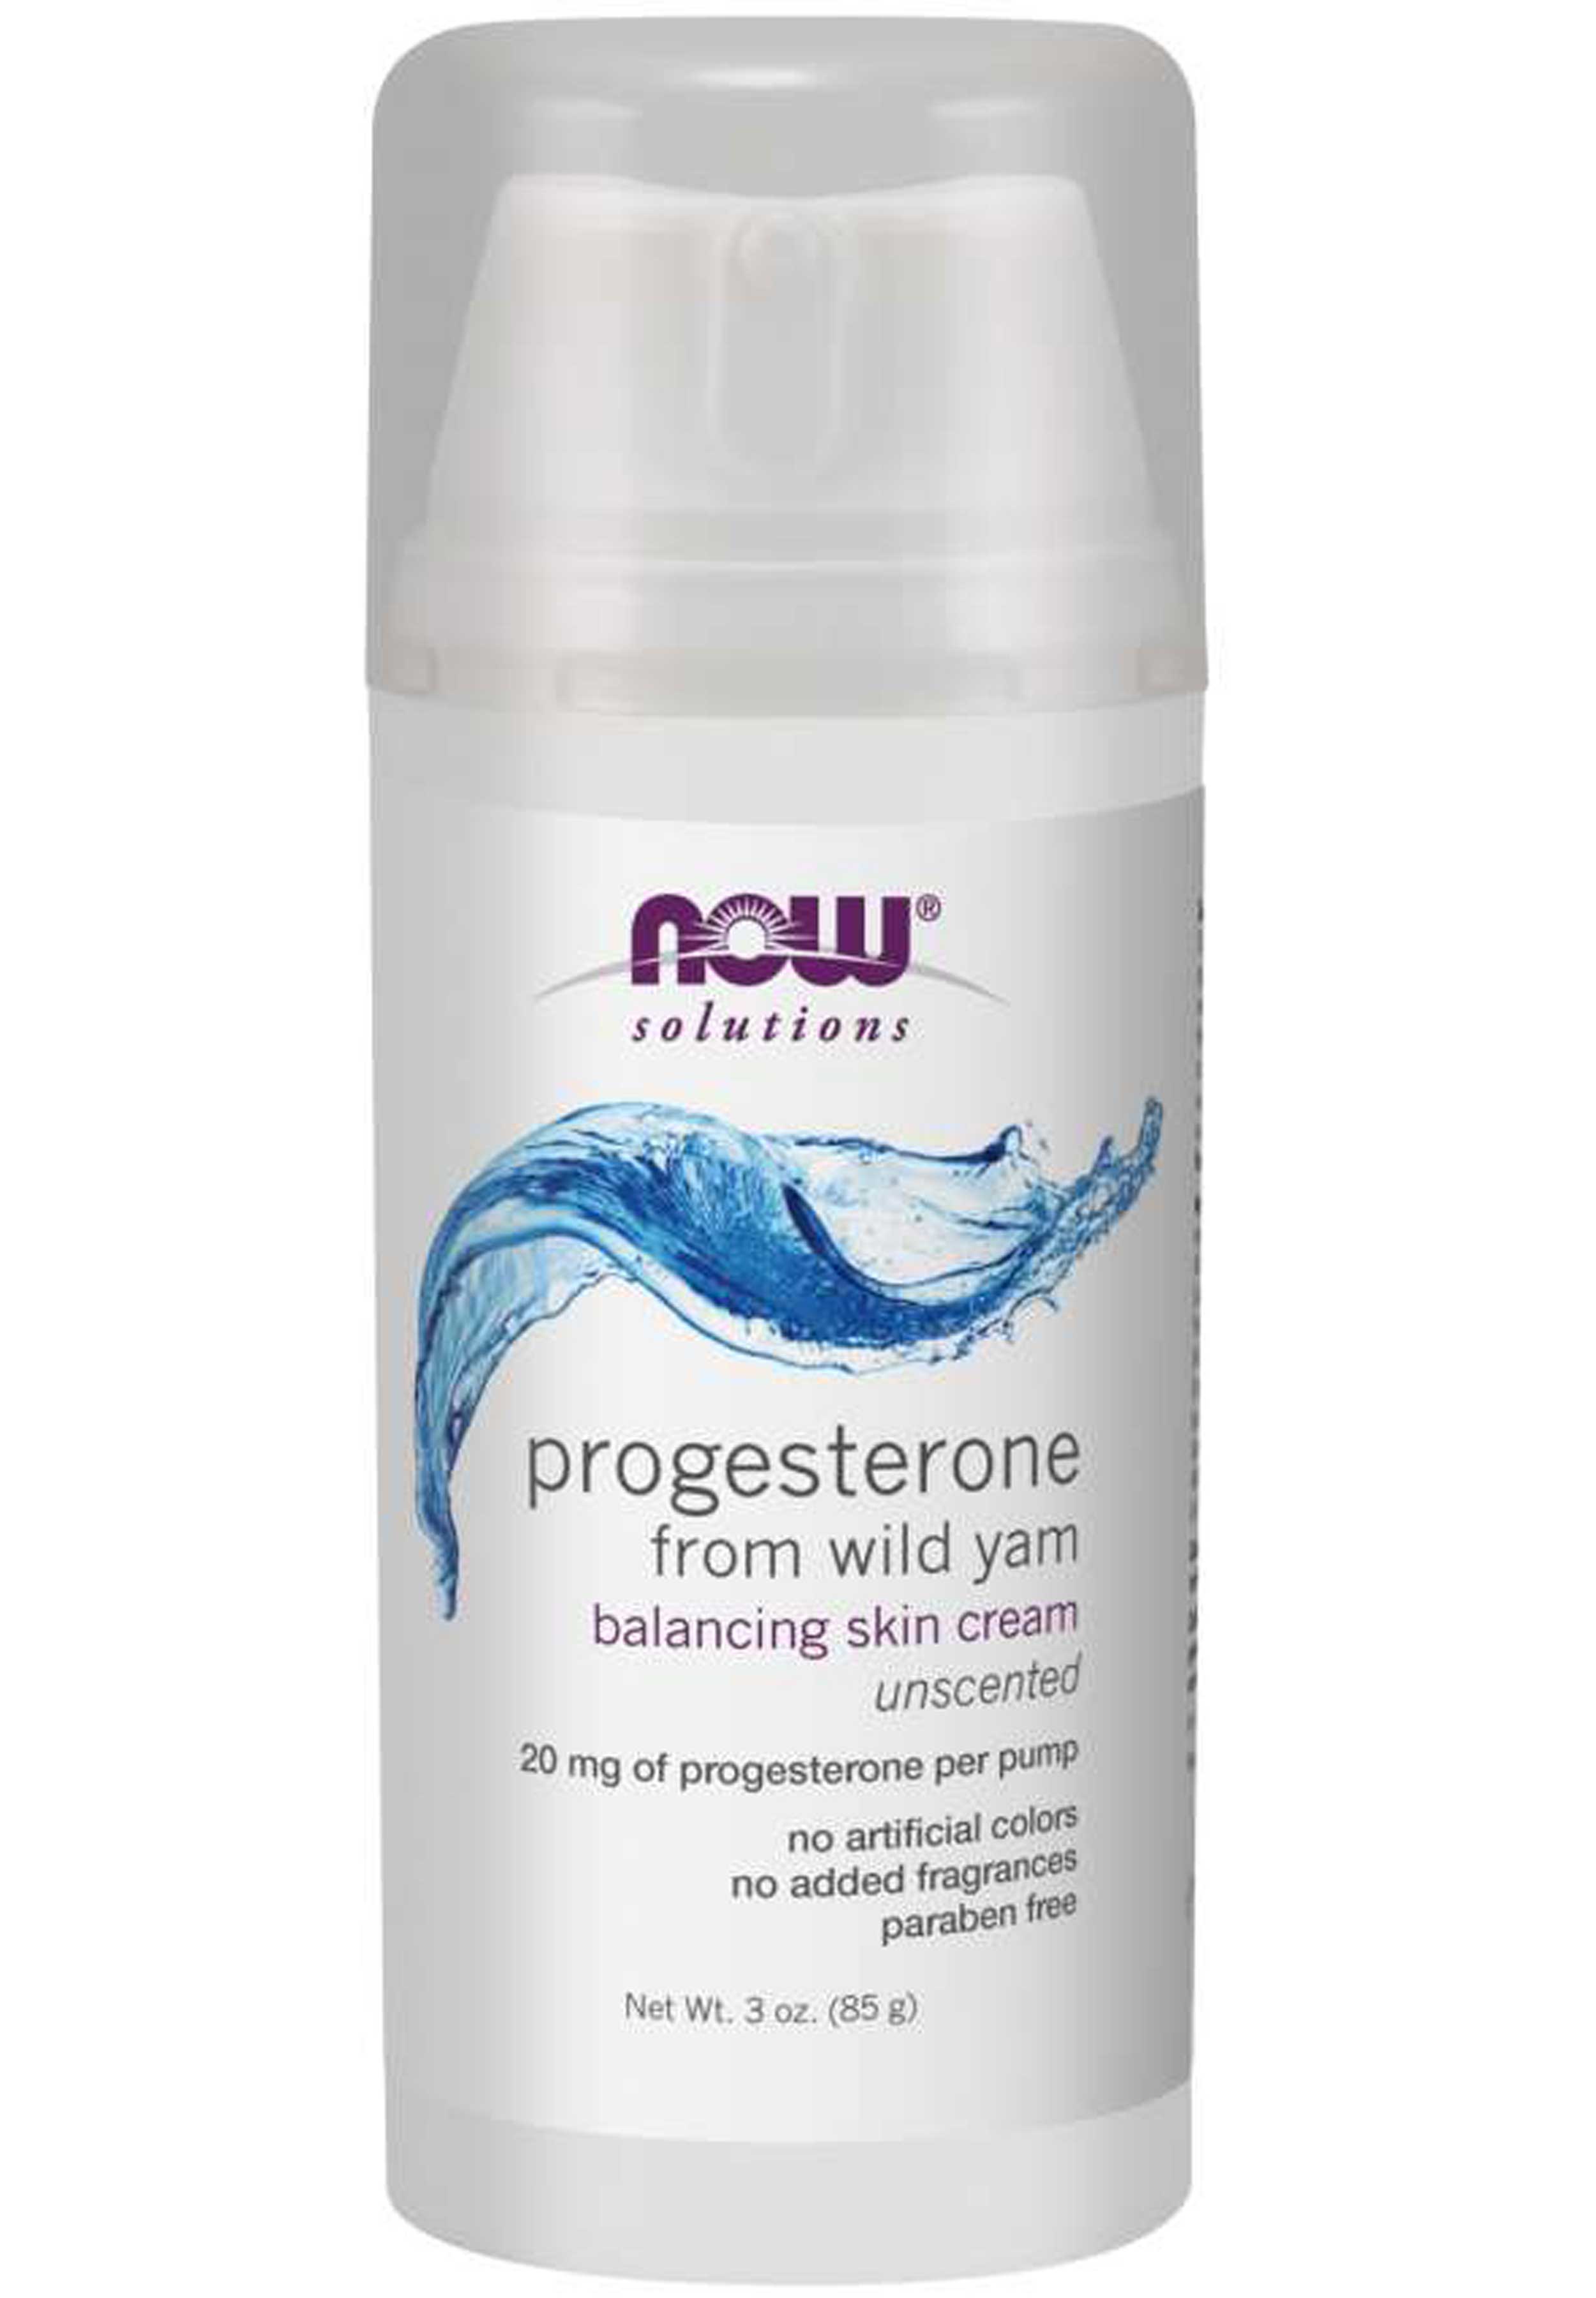 NOW Solutions Progesterone from Wild Yam Balancing Skin Cream